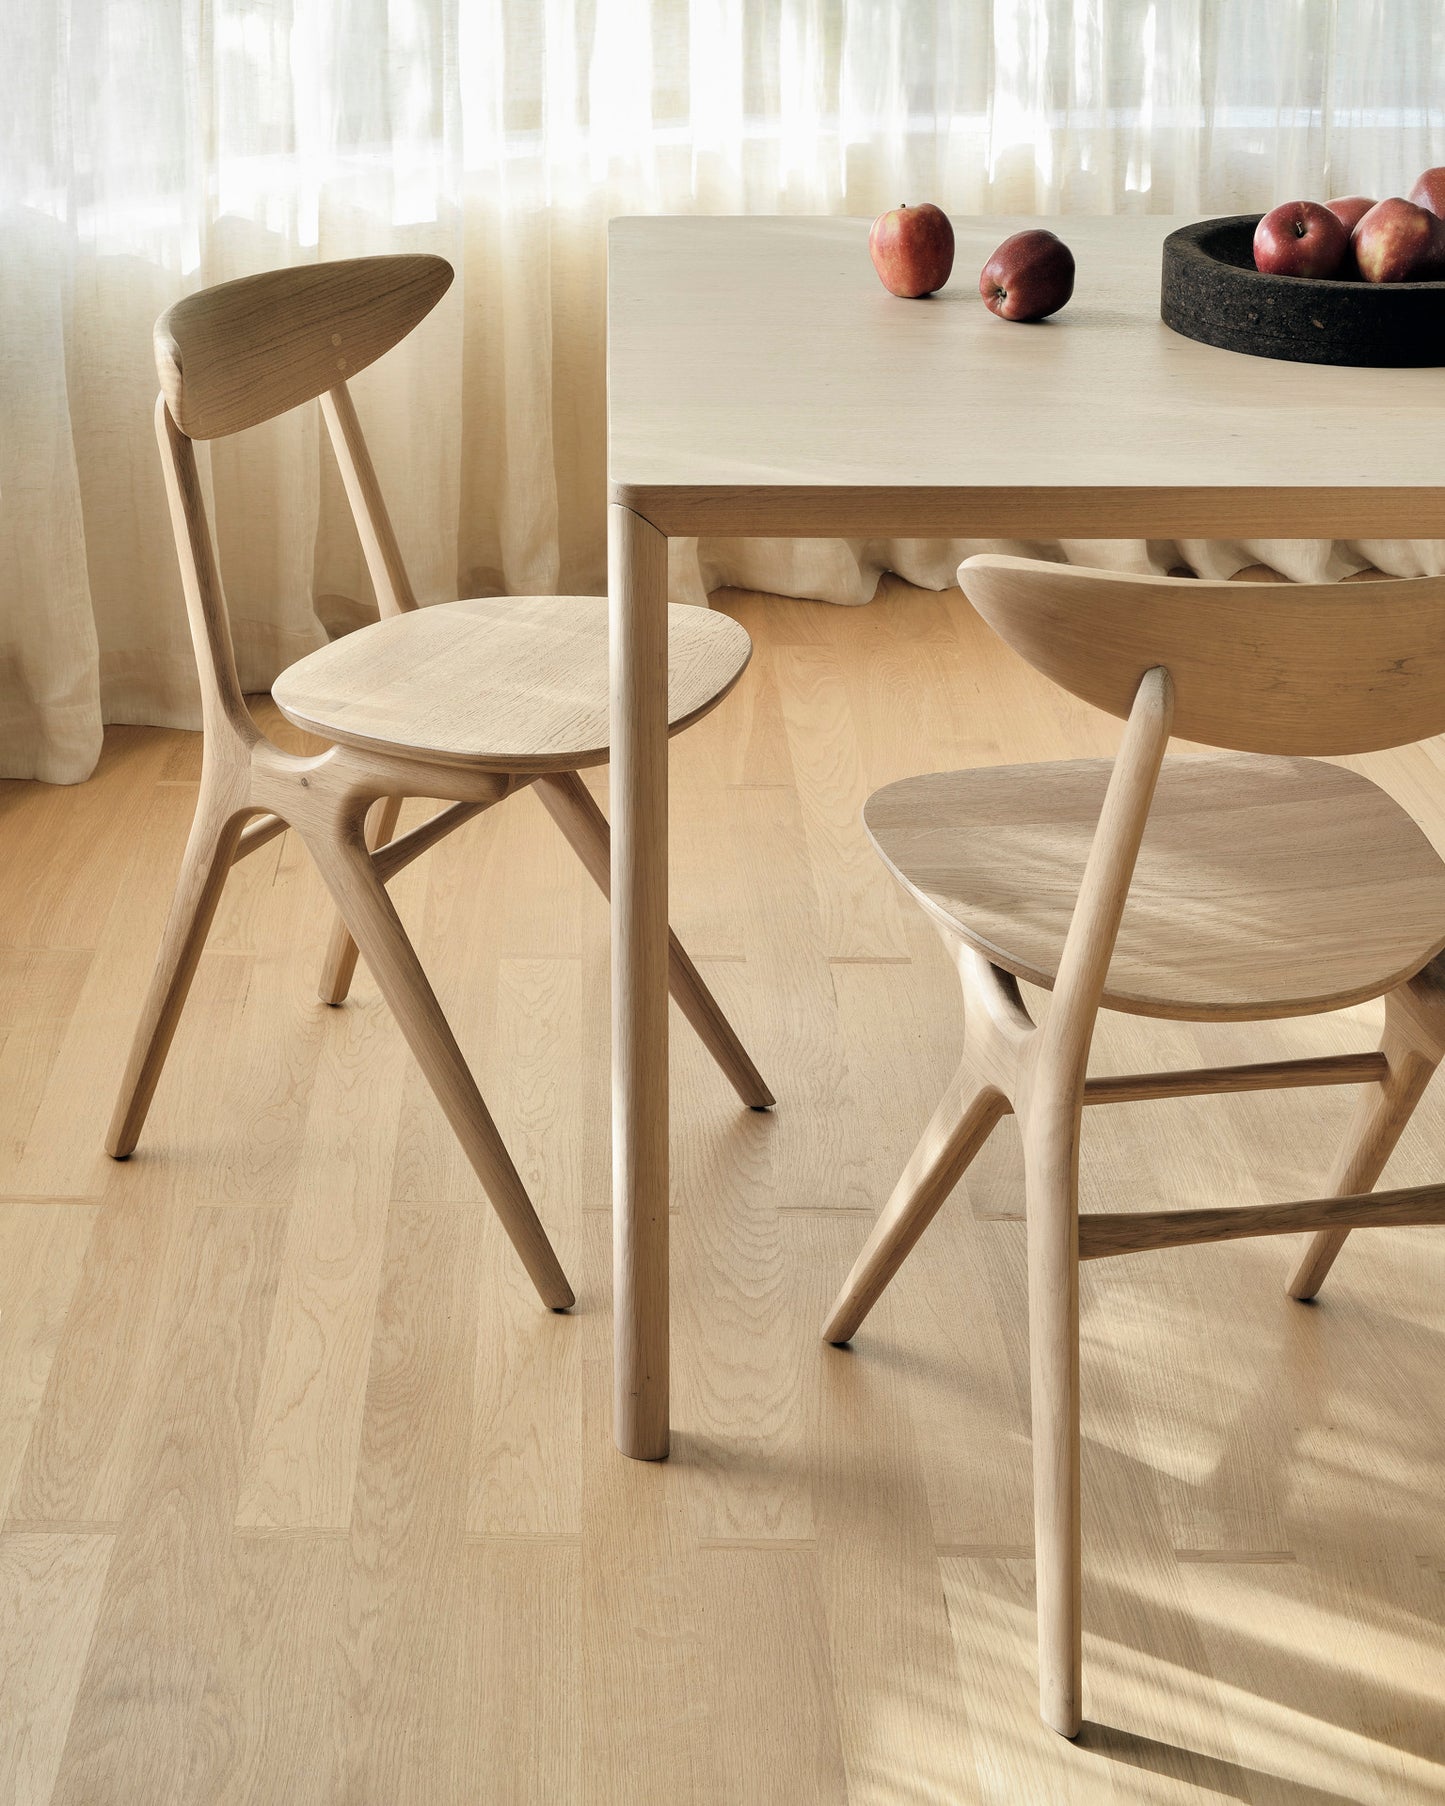 Ethnicraft Oak Eye Dining Chair is available from Make Your House A Home, Bendigo, Victoria, Australia